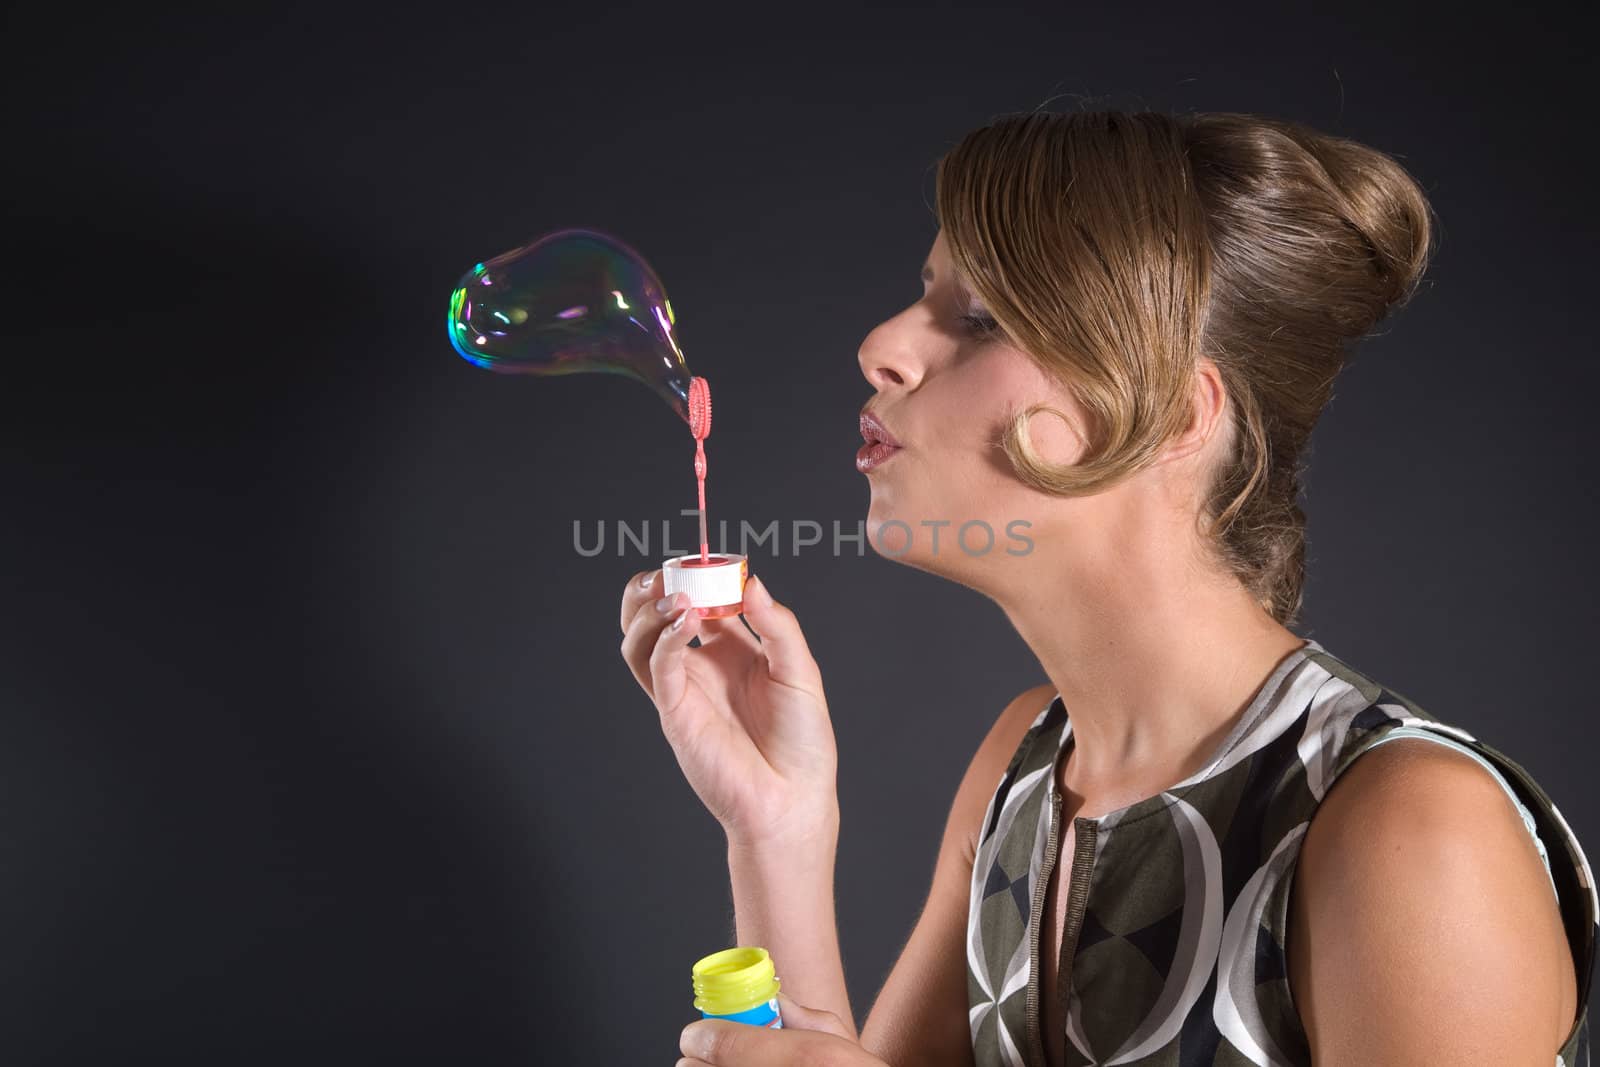 Pretty blond girl with hair in fifties styles blowing soapbubbles